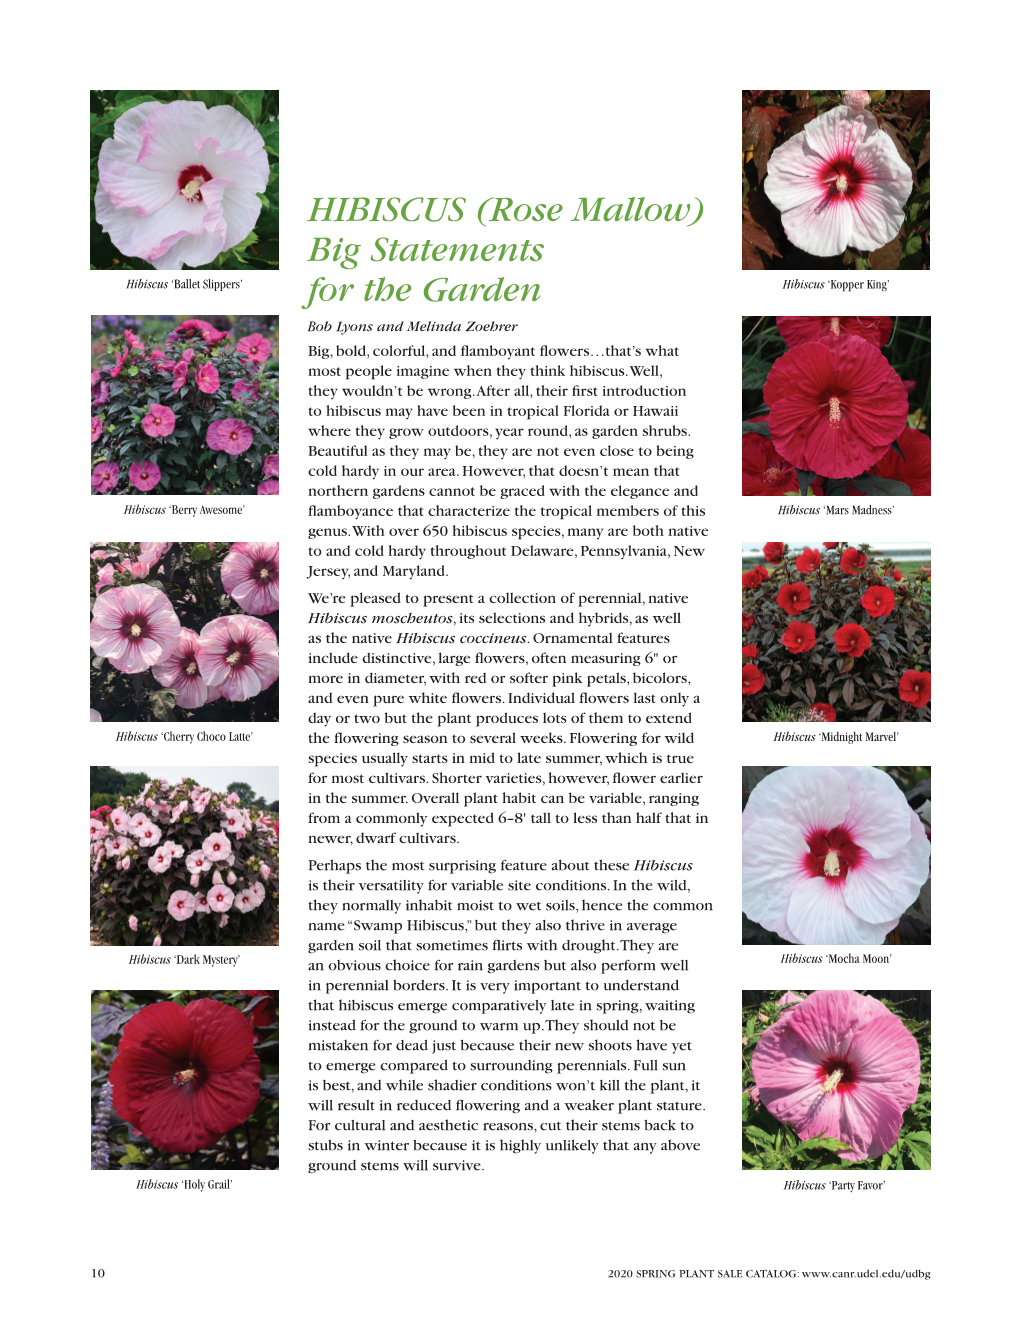 HIBISCUS (Rose Mallow) Big Statements for the Garden